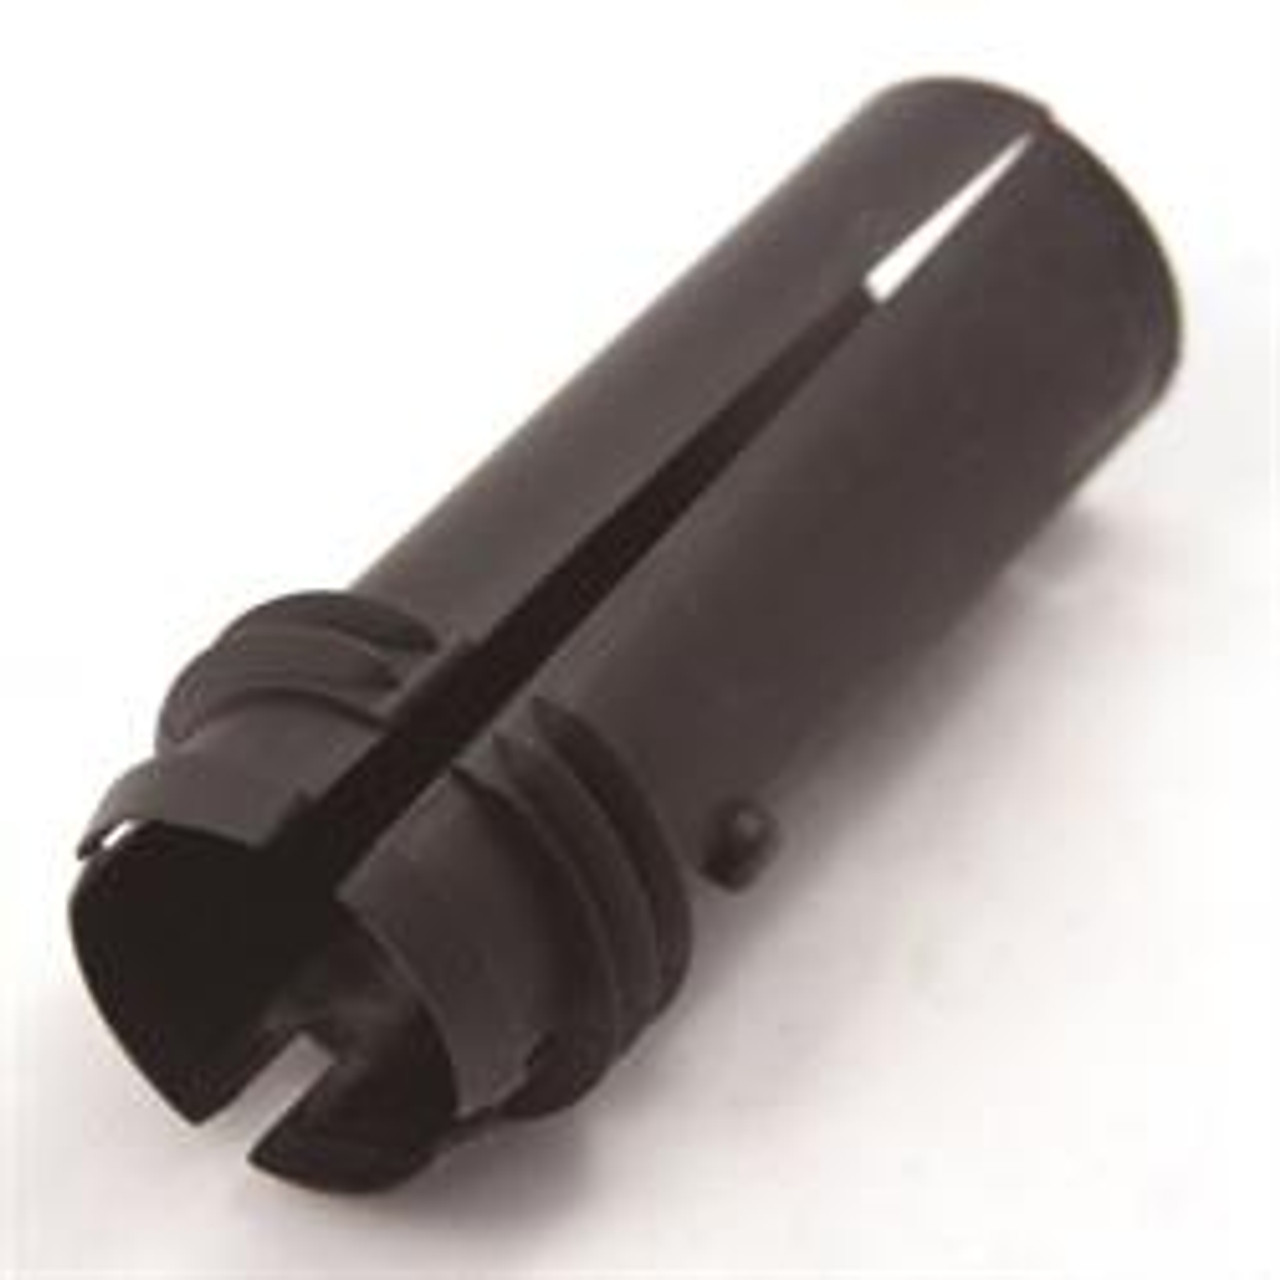 Cannon 2222822 COLLET BASE TUBE - USE 3393300